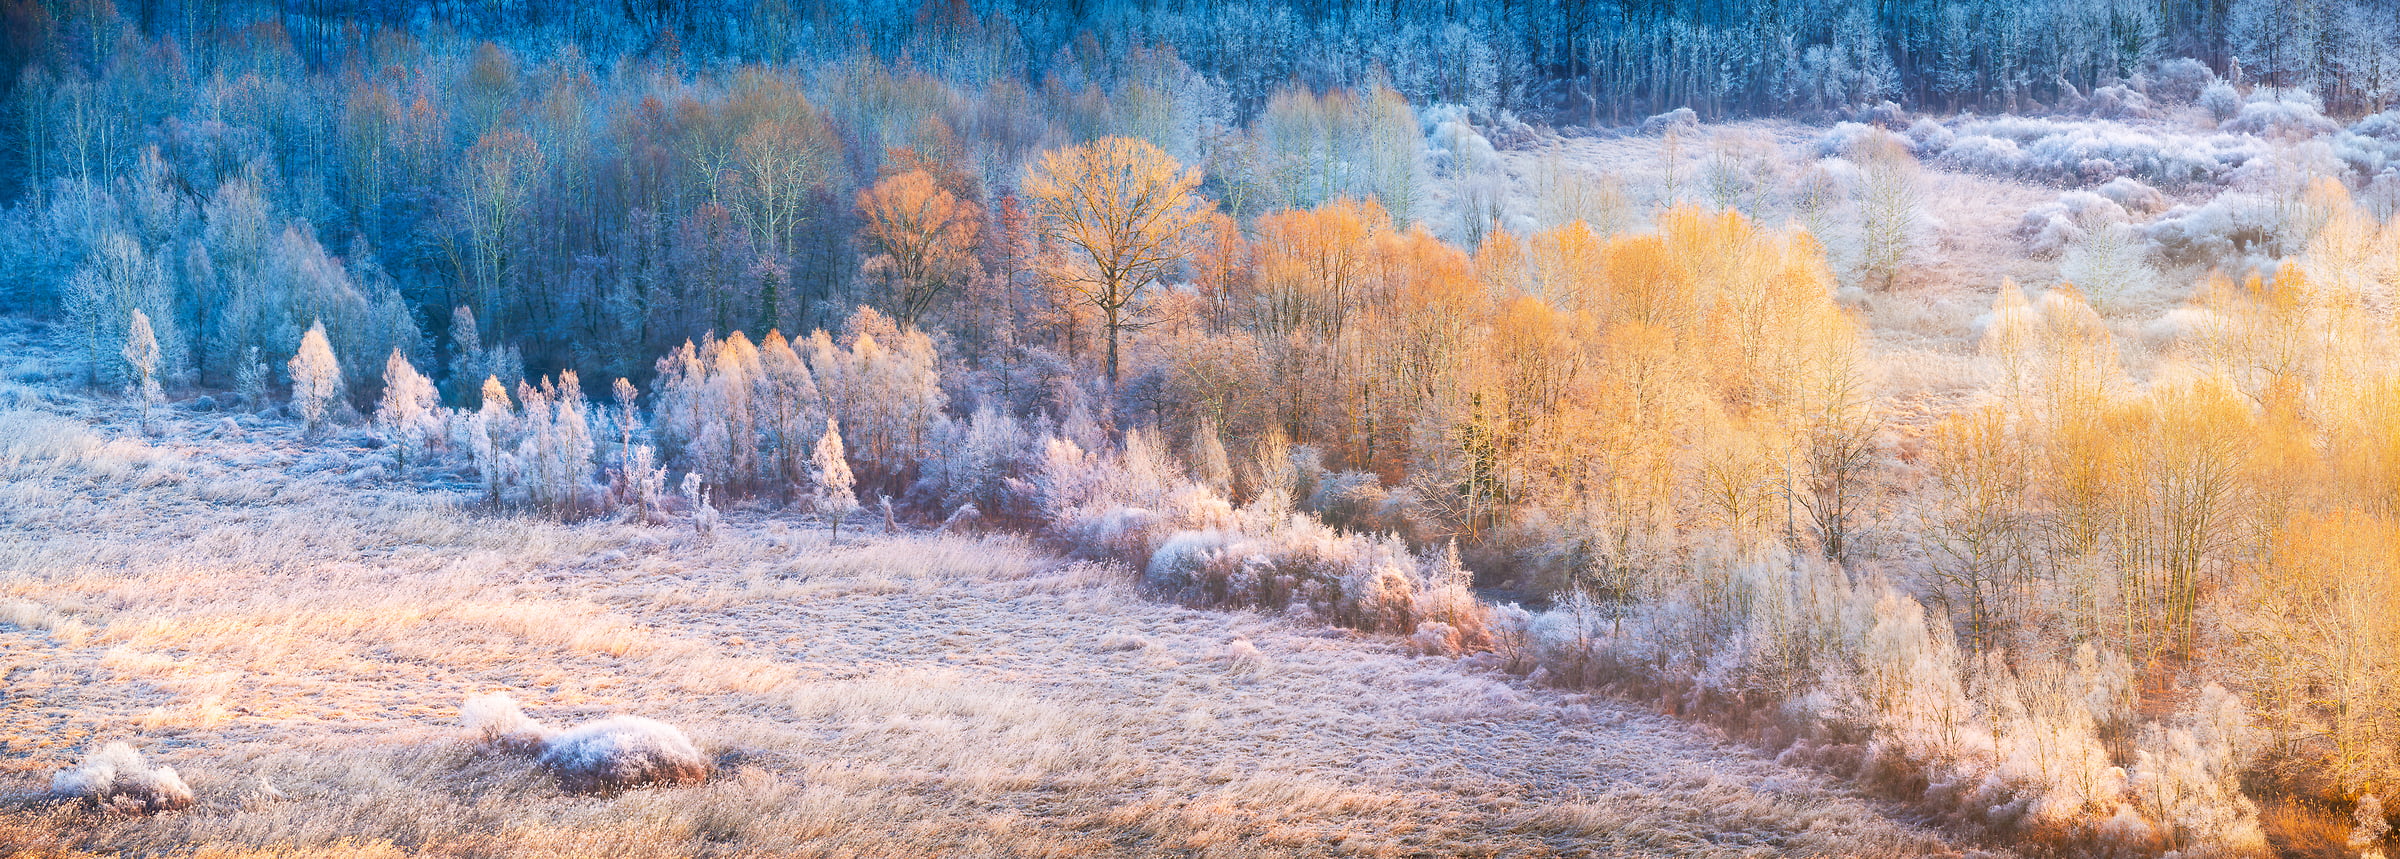 201 megapixels! A very high resolution, panorama VAST photo print of trees at sunrise in a sunny field with snow; landscape photograph created by Ennio Pozzetti in Airuno, Lombardia, Italy